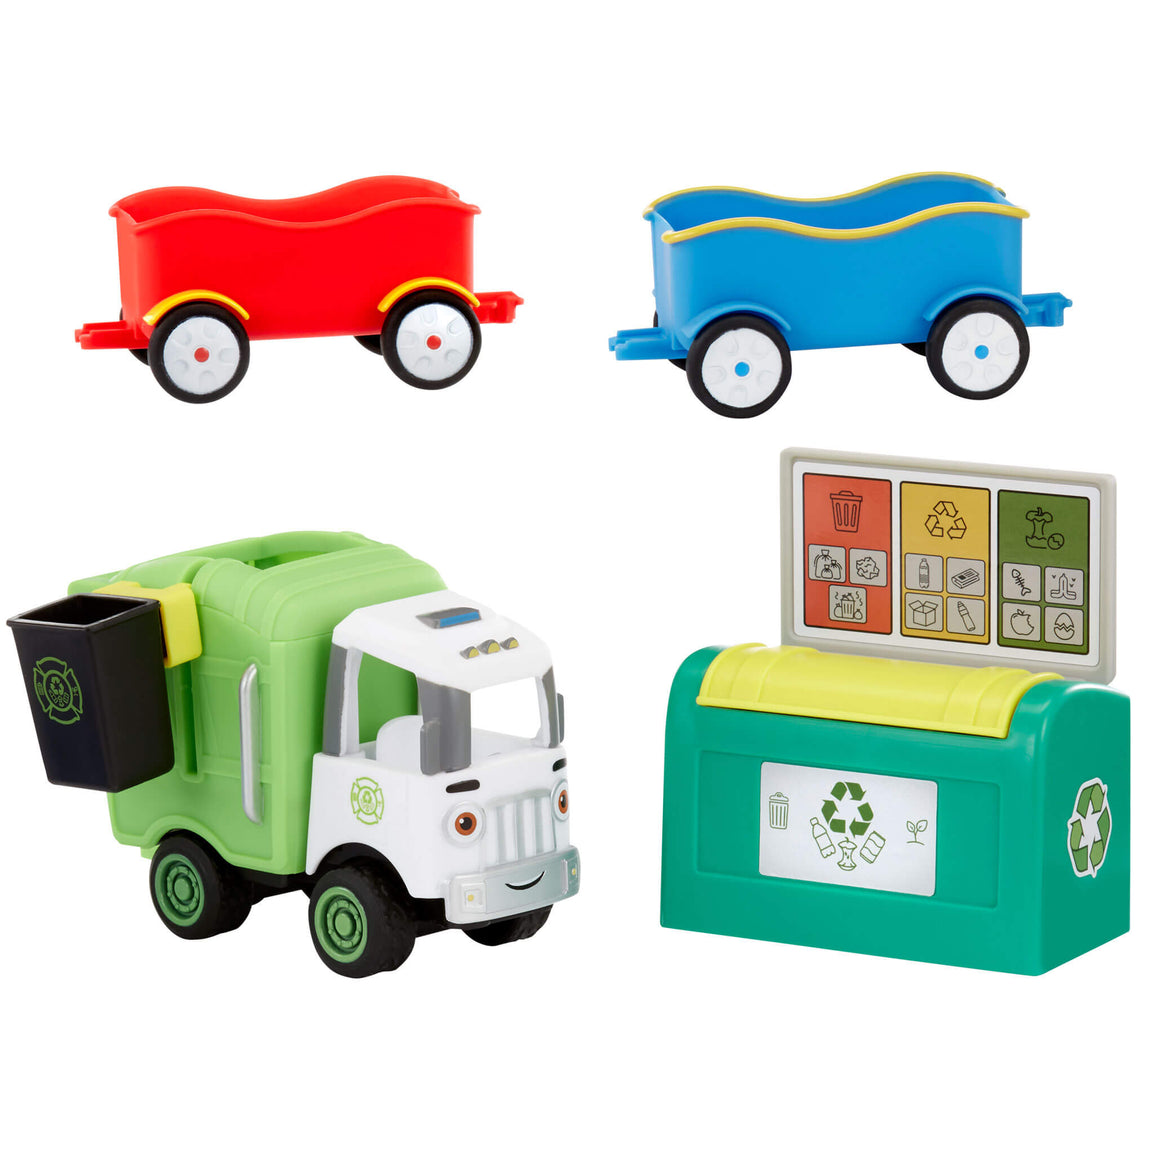 Let's Go Cozy Coupe™ Garbage Truck Playset